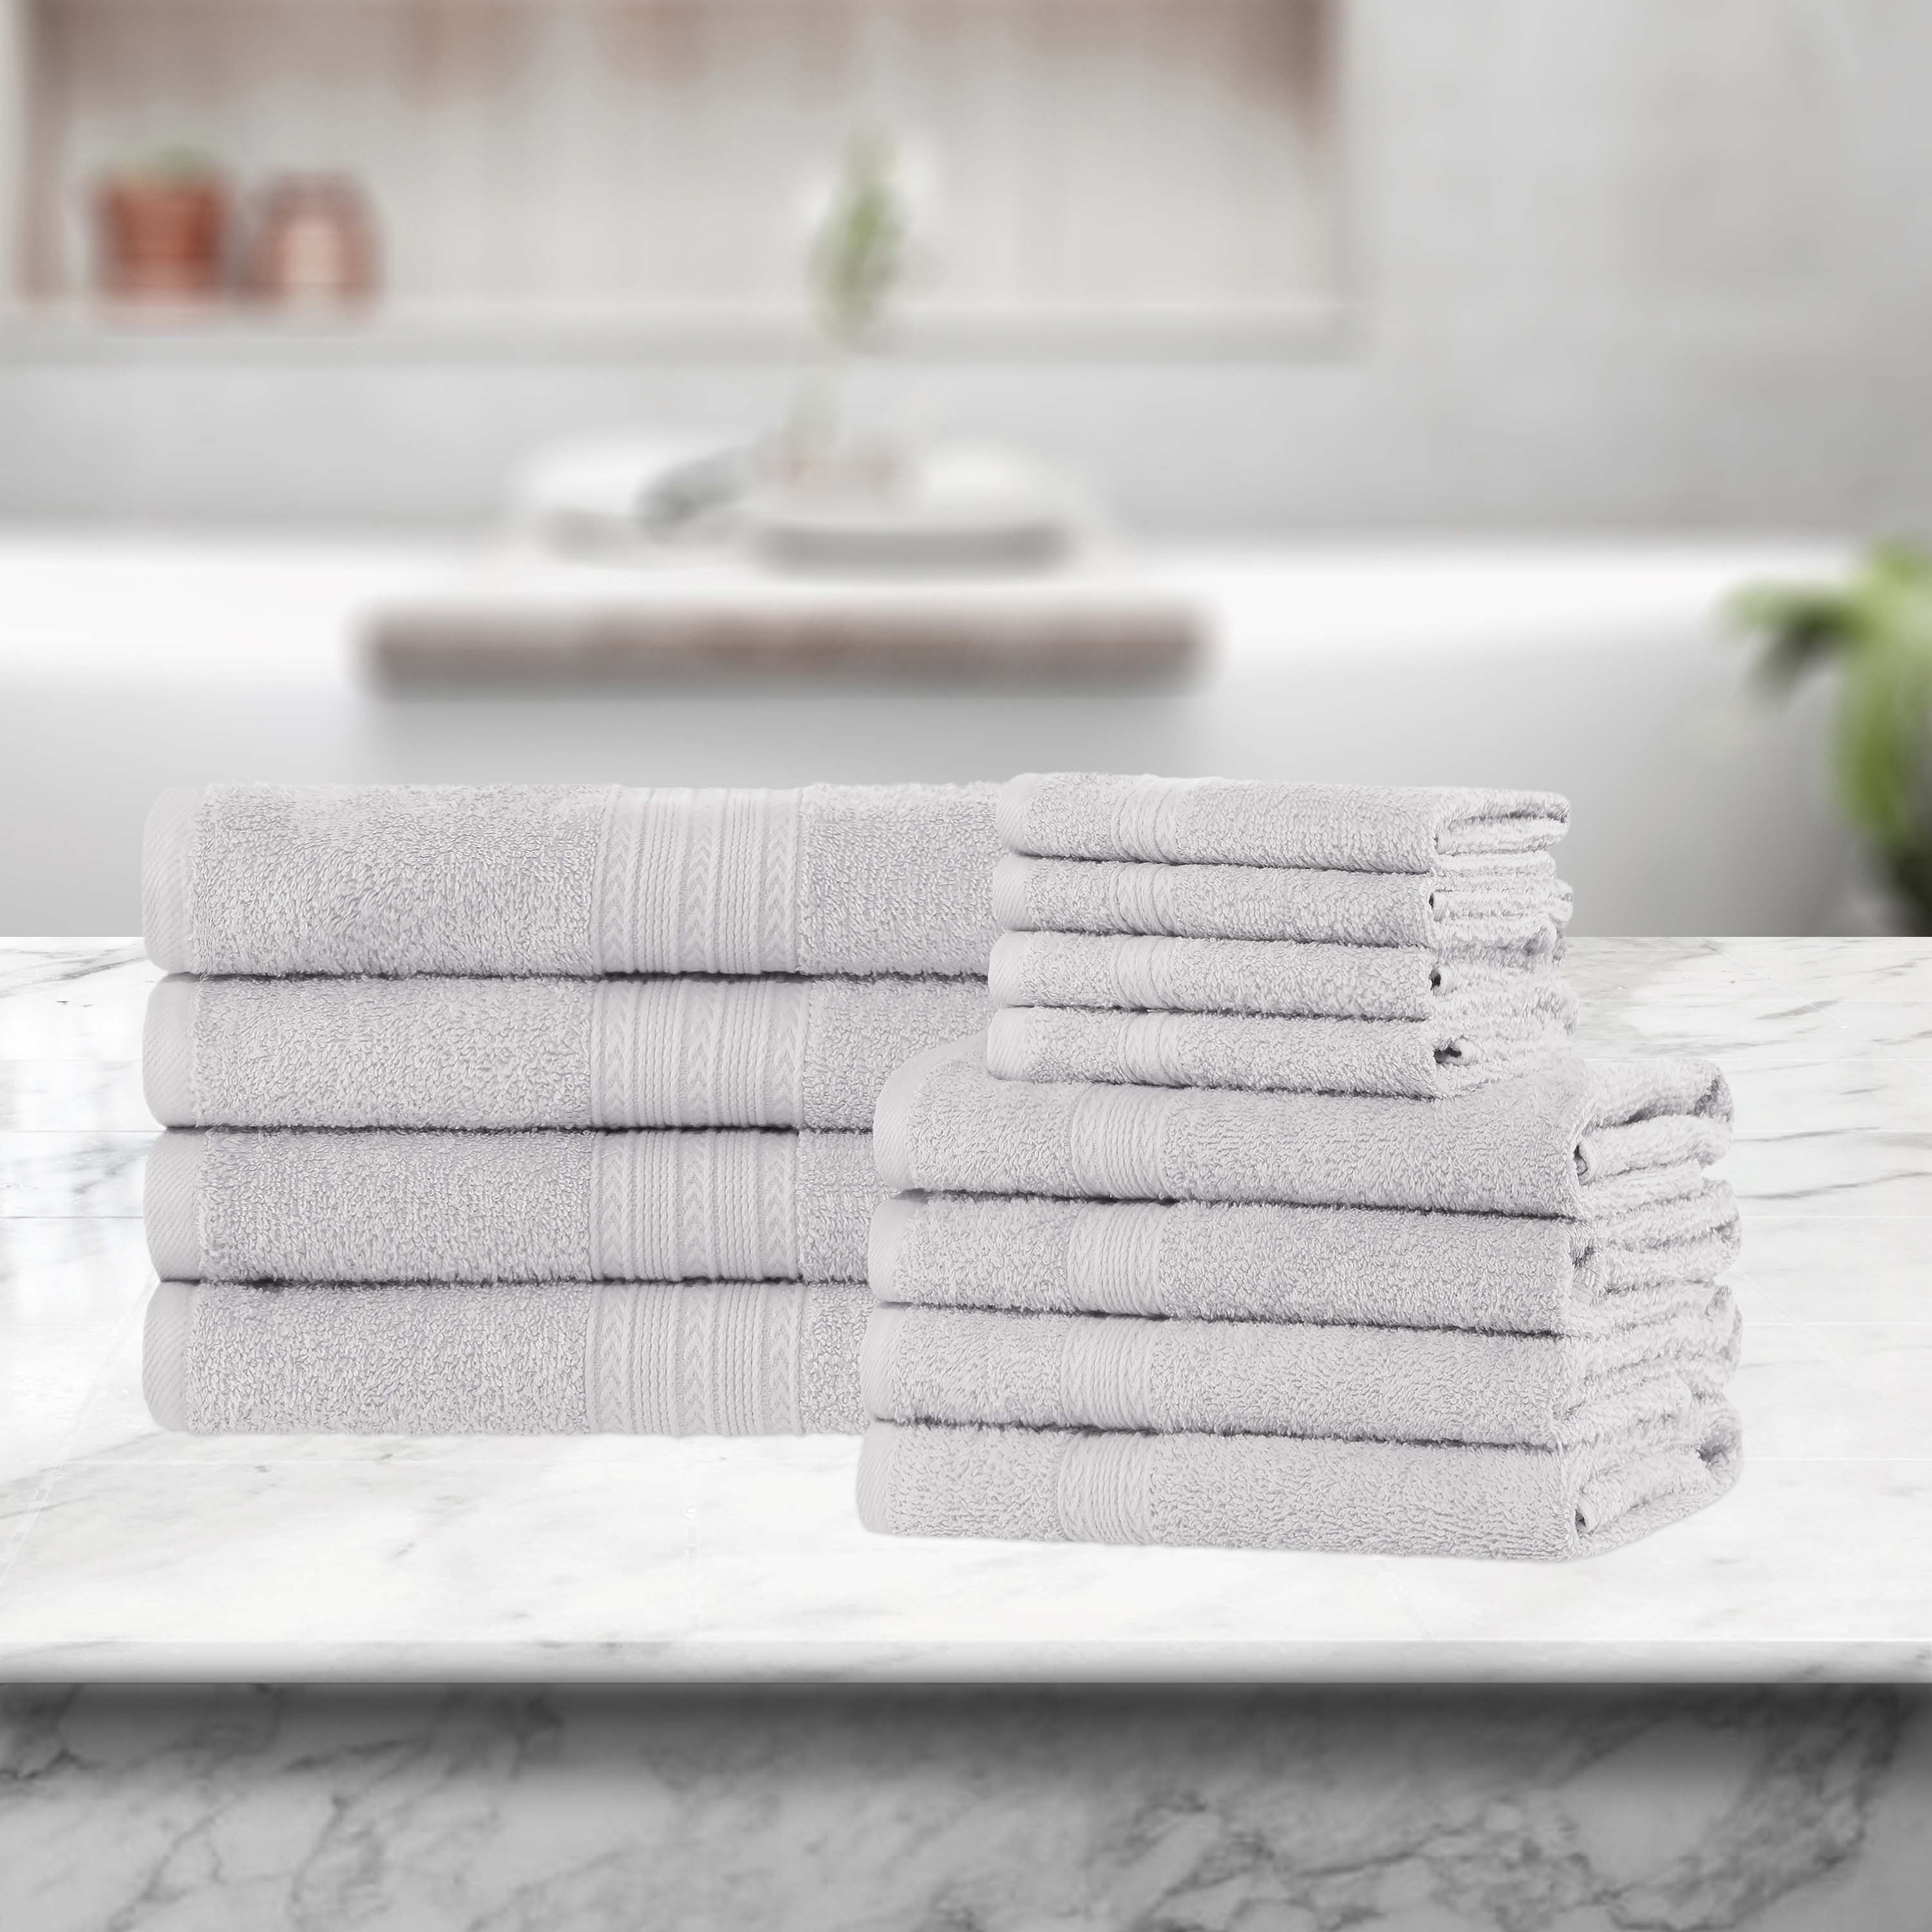 https://ak1.ostkcdn.com/images/products/is/images/direct/1e8e451ef60e798d9d4fecf6805efce5fbe63c10/Eco-Friendly-Sustainable-Cotton-Bathroom-Towel-Set-of-12-by-Superior.jpg